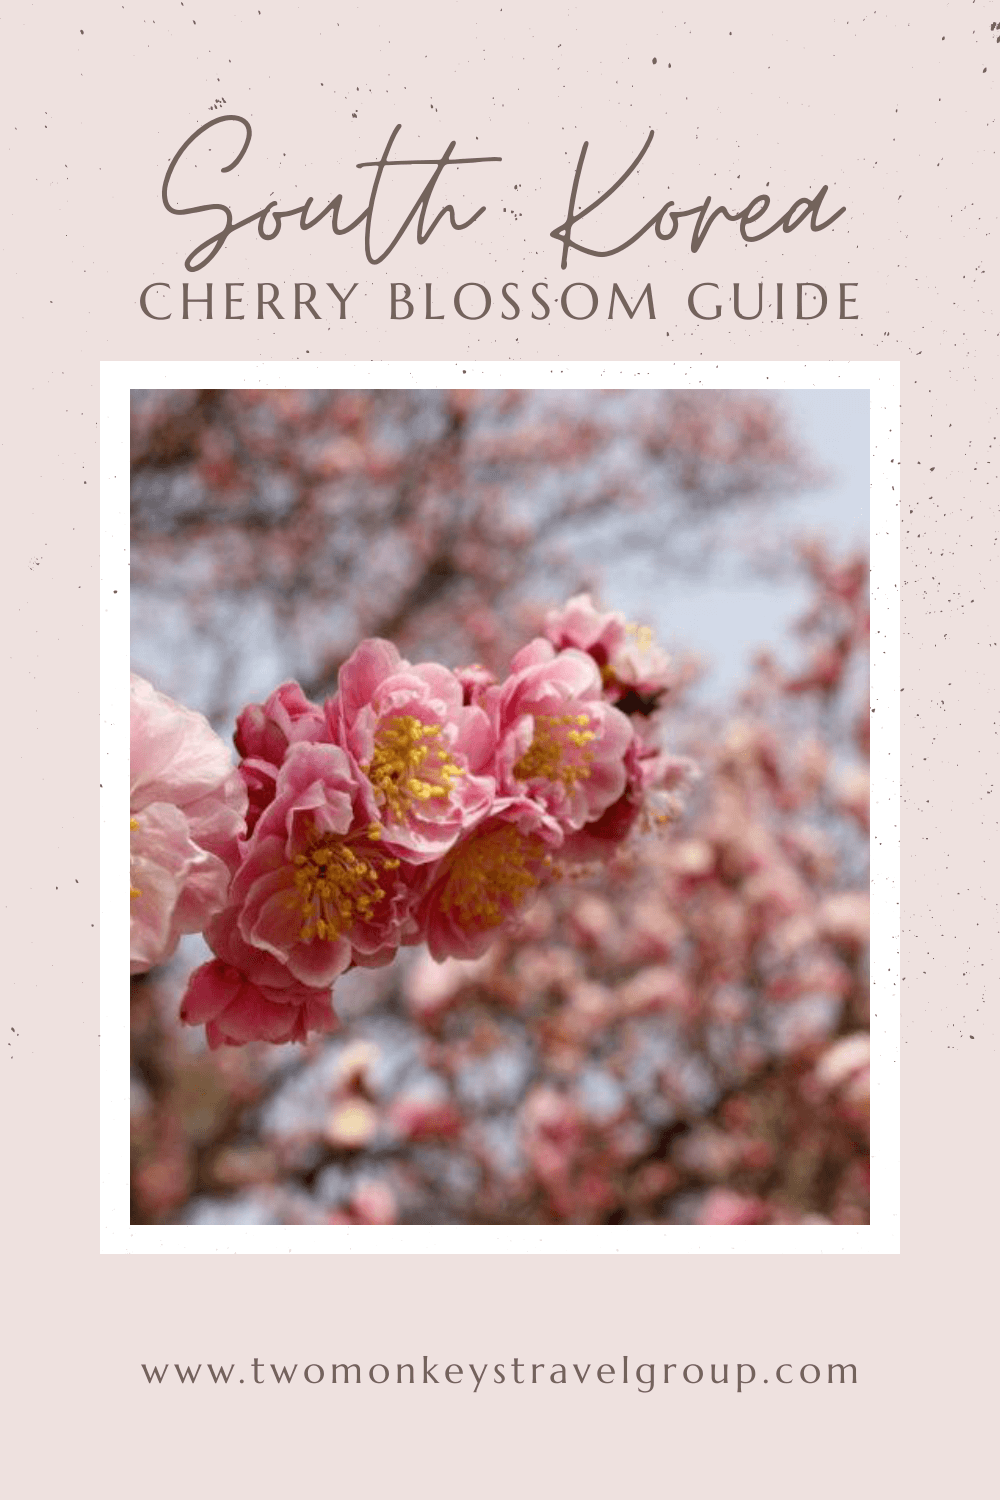 South Korea Cherry Blossom Guide When to visit SoKor to see the Cherry Blossom